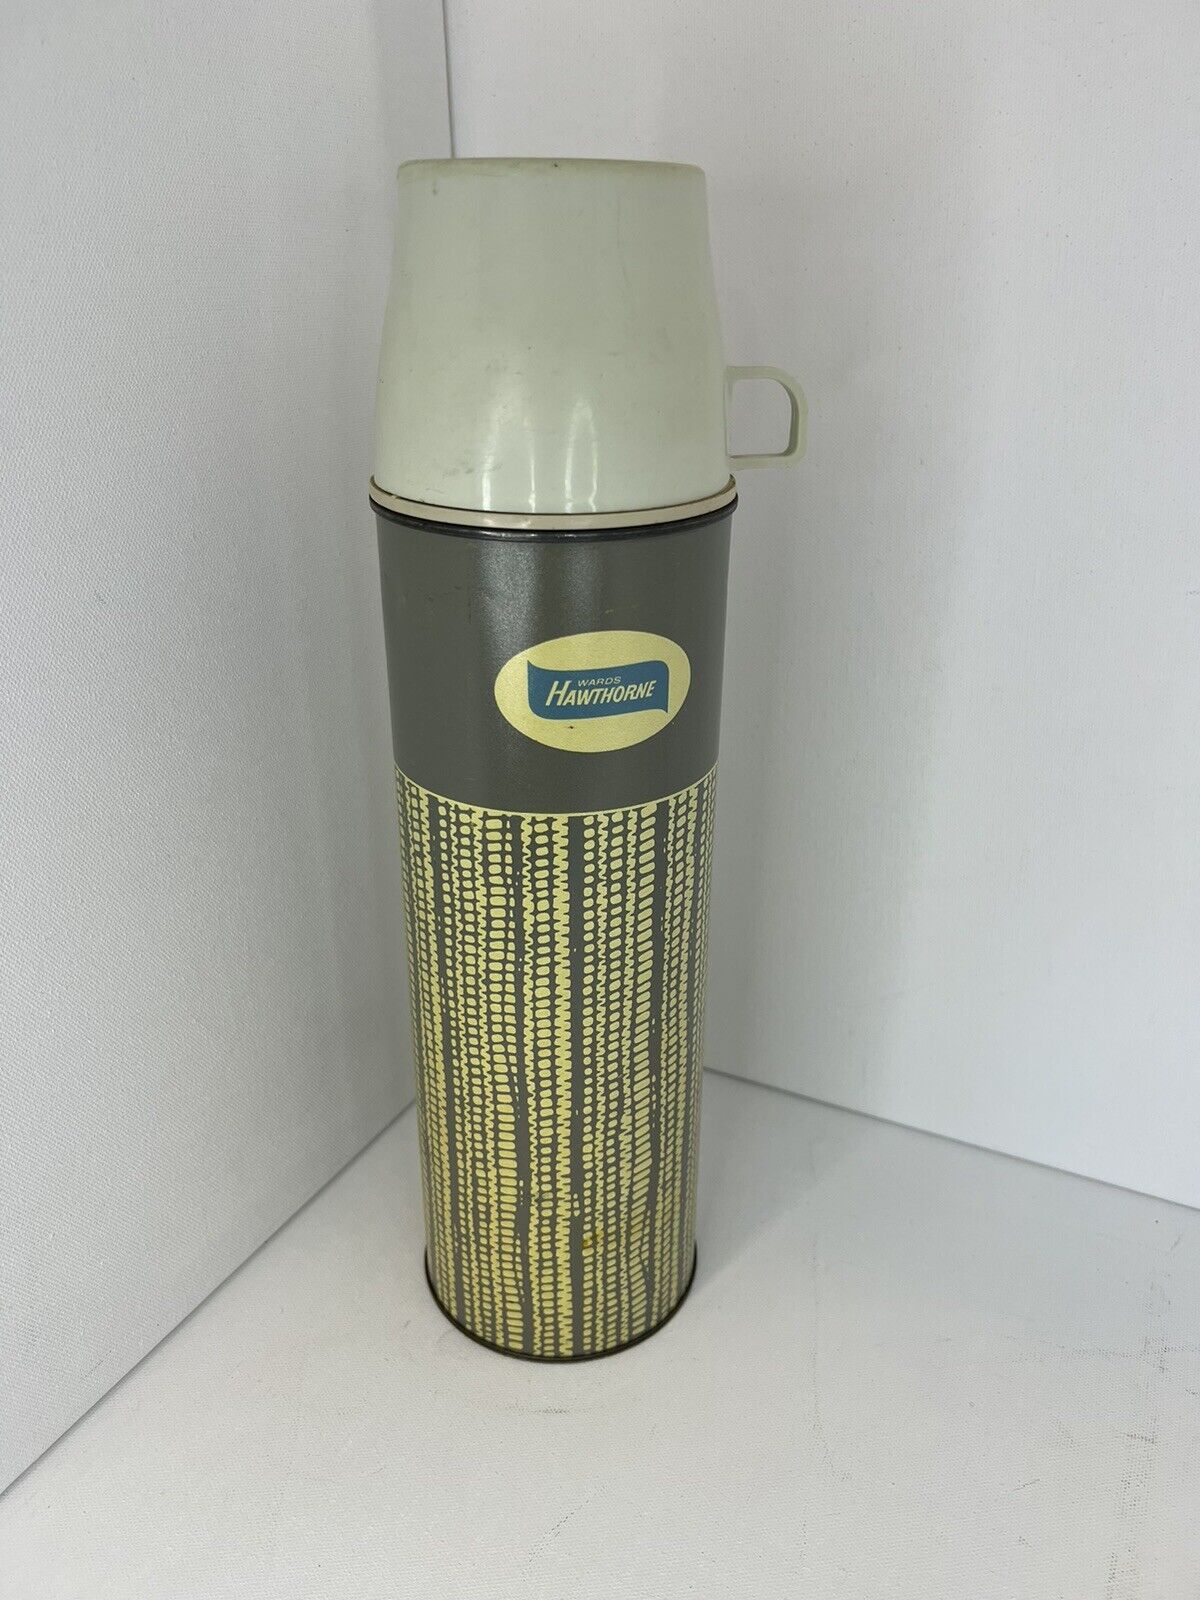 Vintage Wards Hawthorne By Thermos Hot/cold Thermos